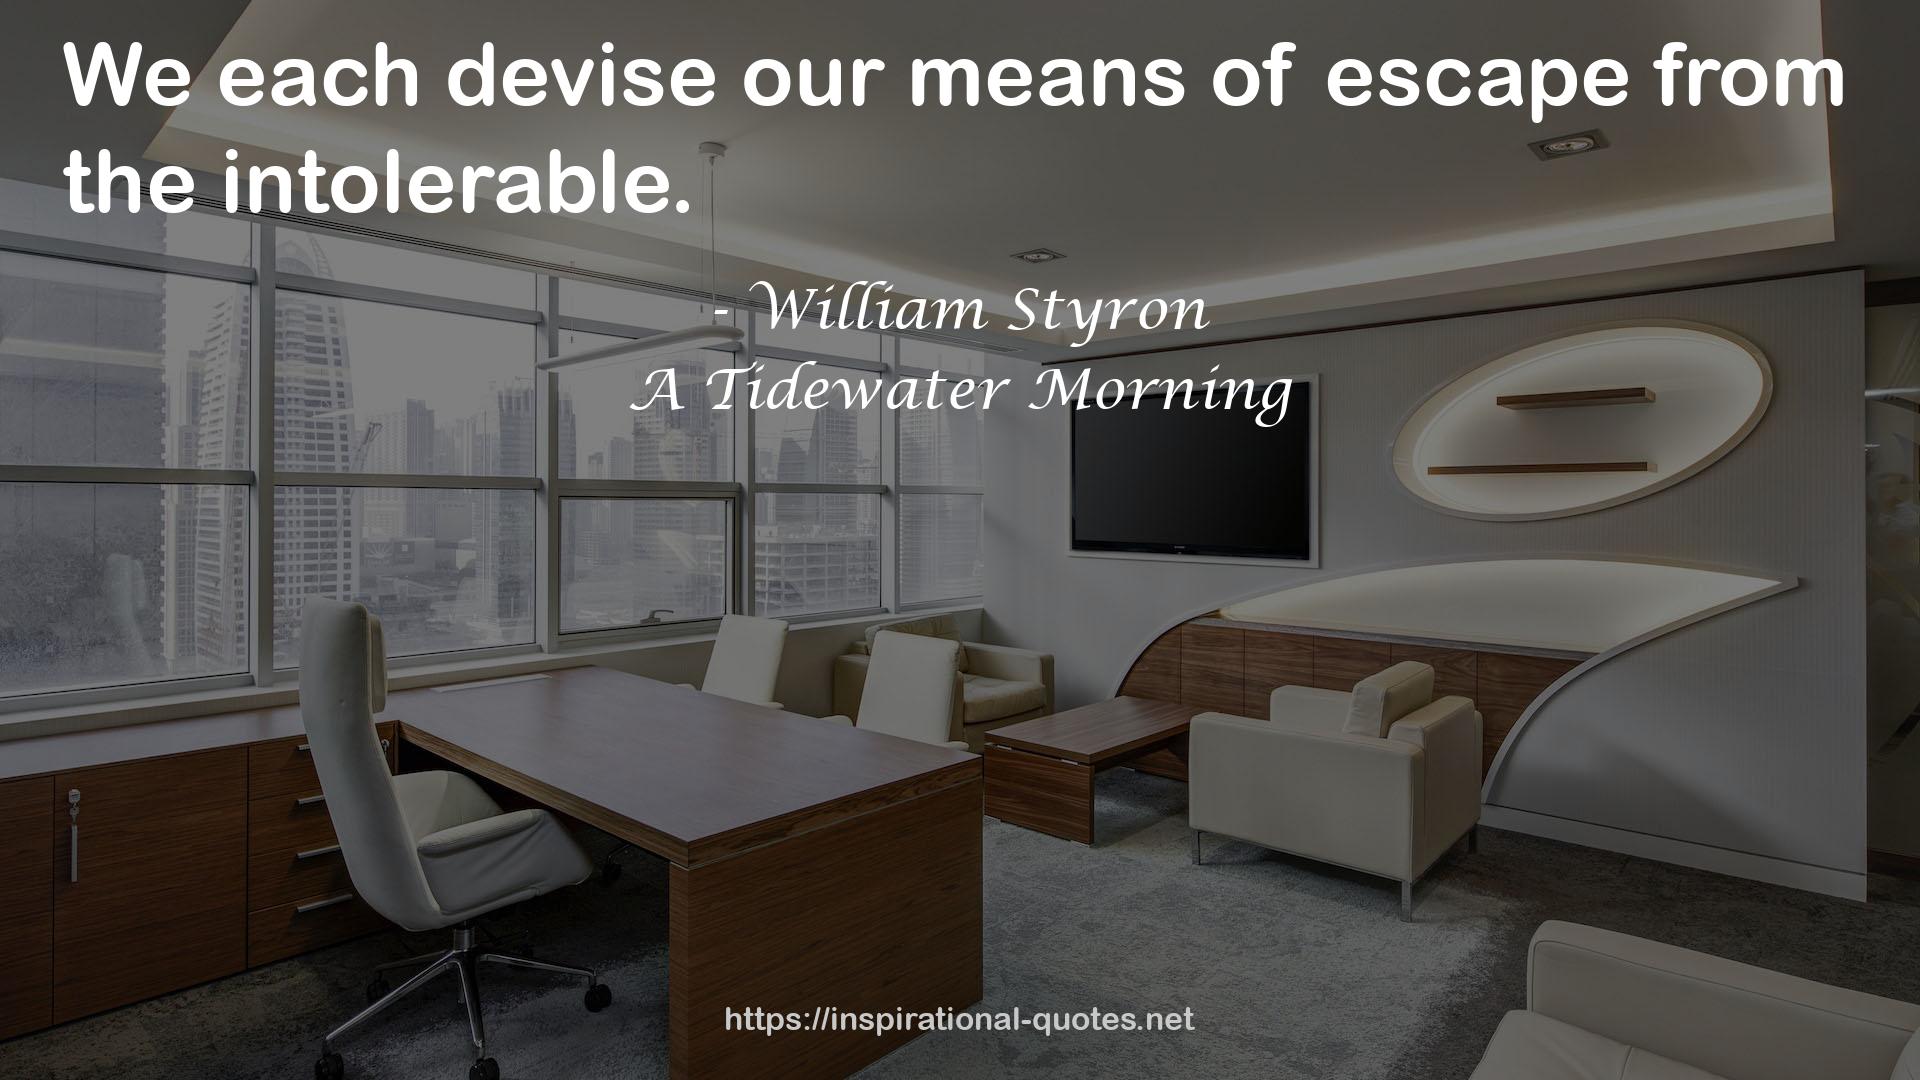 A Tidewater Morning QUOTES